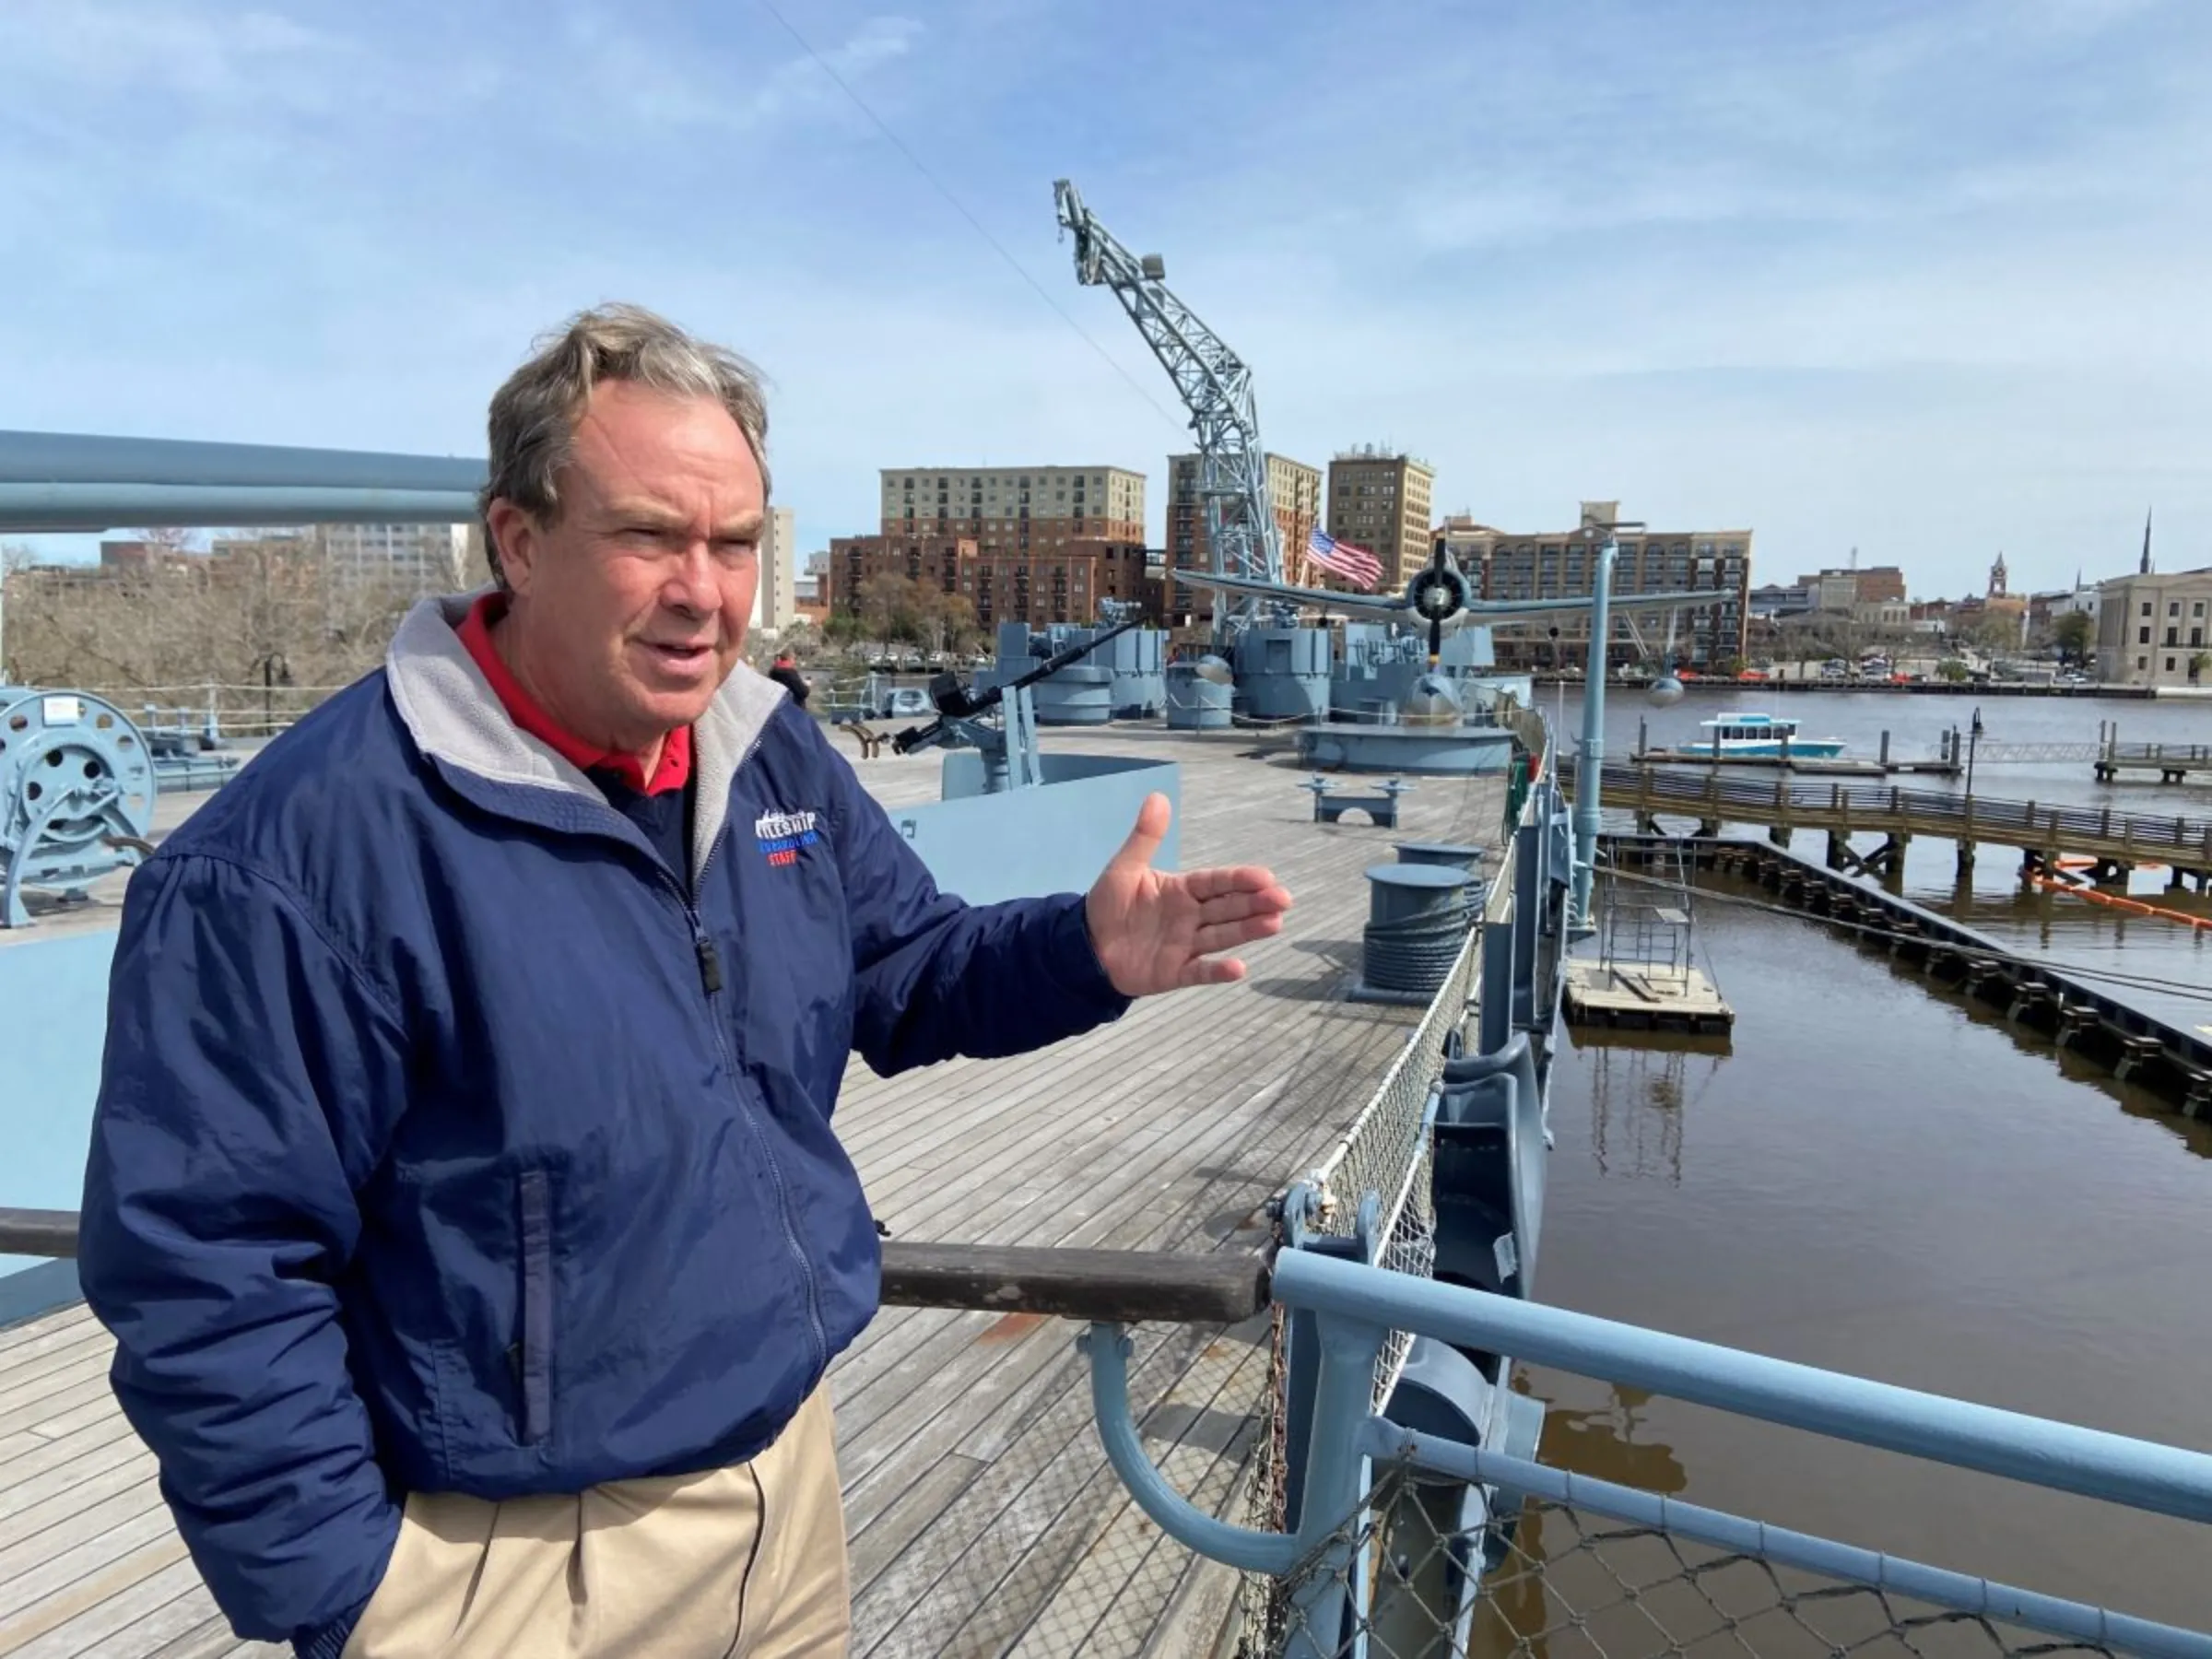 Terry Bragg, executive director of the Battleship North Carolina, is pictured on the ship across the Cape Fear River from downtown Wilmington in North Carolina, USA, February 29, 2024. Thomson Reuters Foundation/David Sherfinski